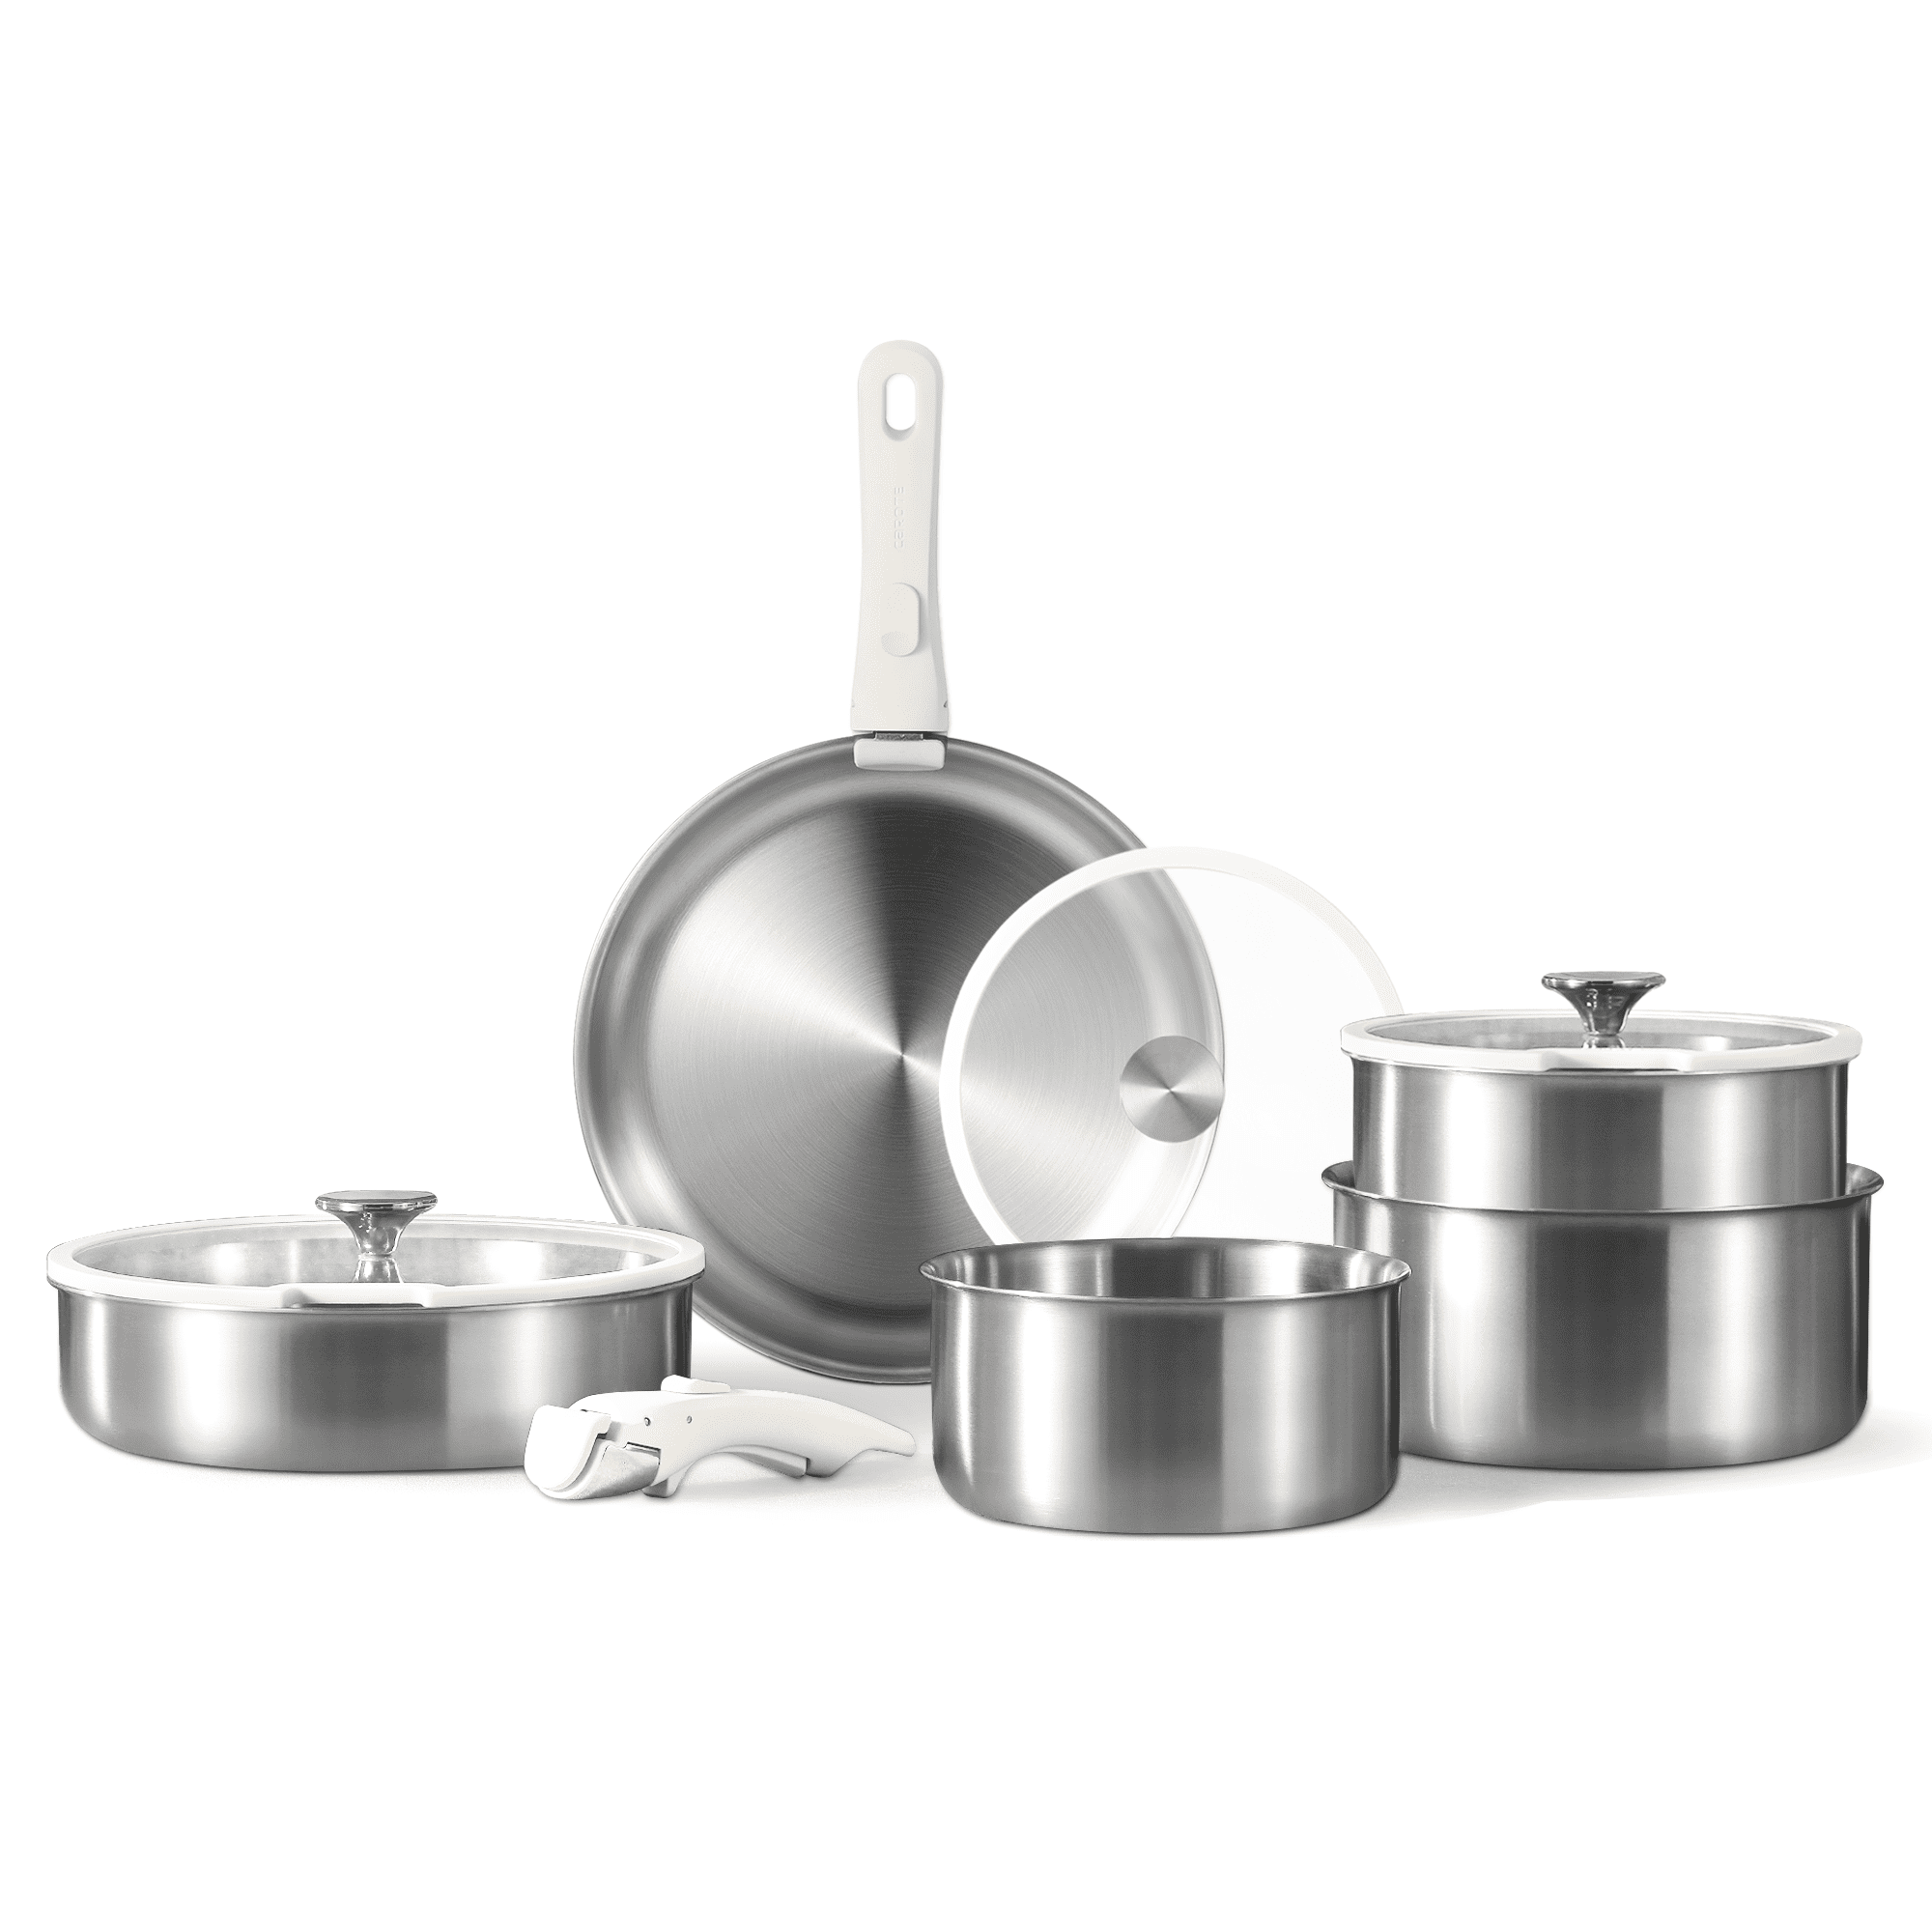 CAROTE Stainless Steel Pots and Pans Set, Cookware Set with Detachable Handle, Induction Kitchen Cookware Sets with Removable Handle, RV Cookware Set, Oven Safe, Stainless Steel-12 piece